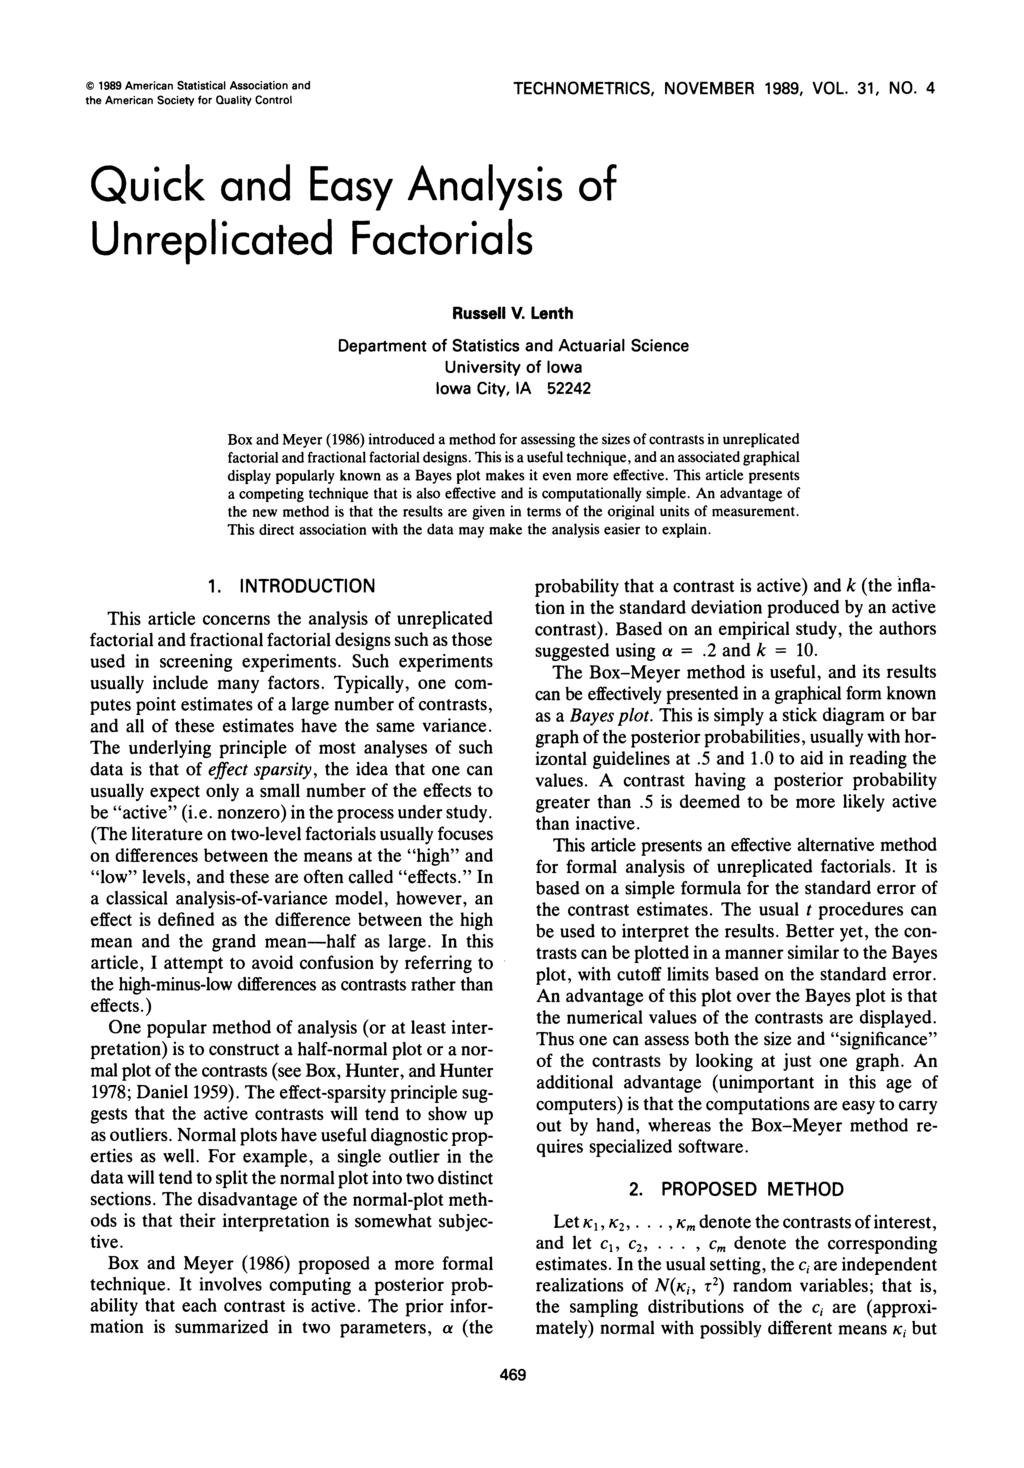 O 1989 American Statistical Association and the American Society for Quality Control Quick and Easy Analysis of Unreplicated Factorials Russell V.